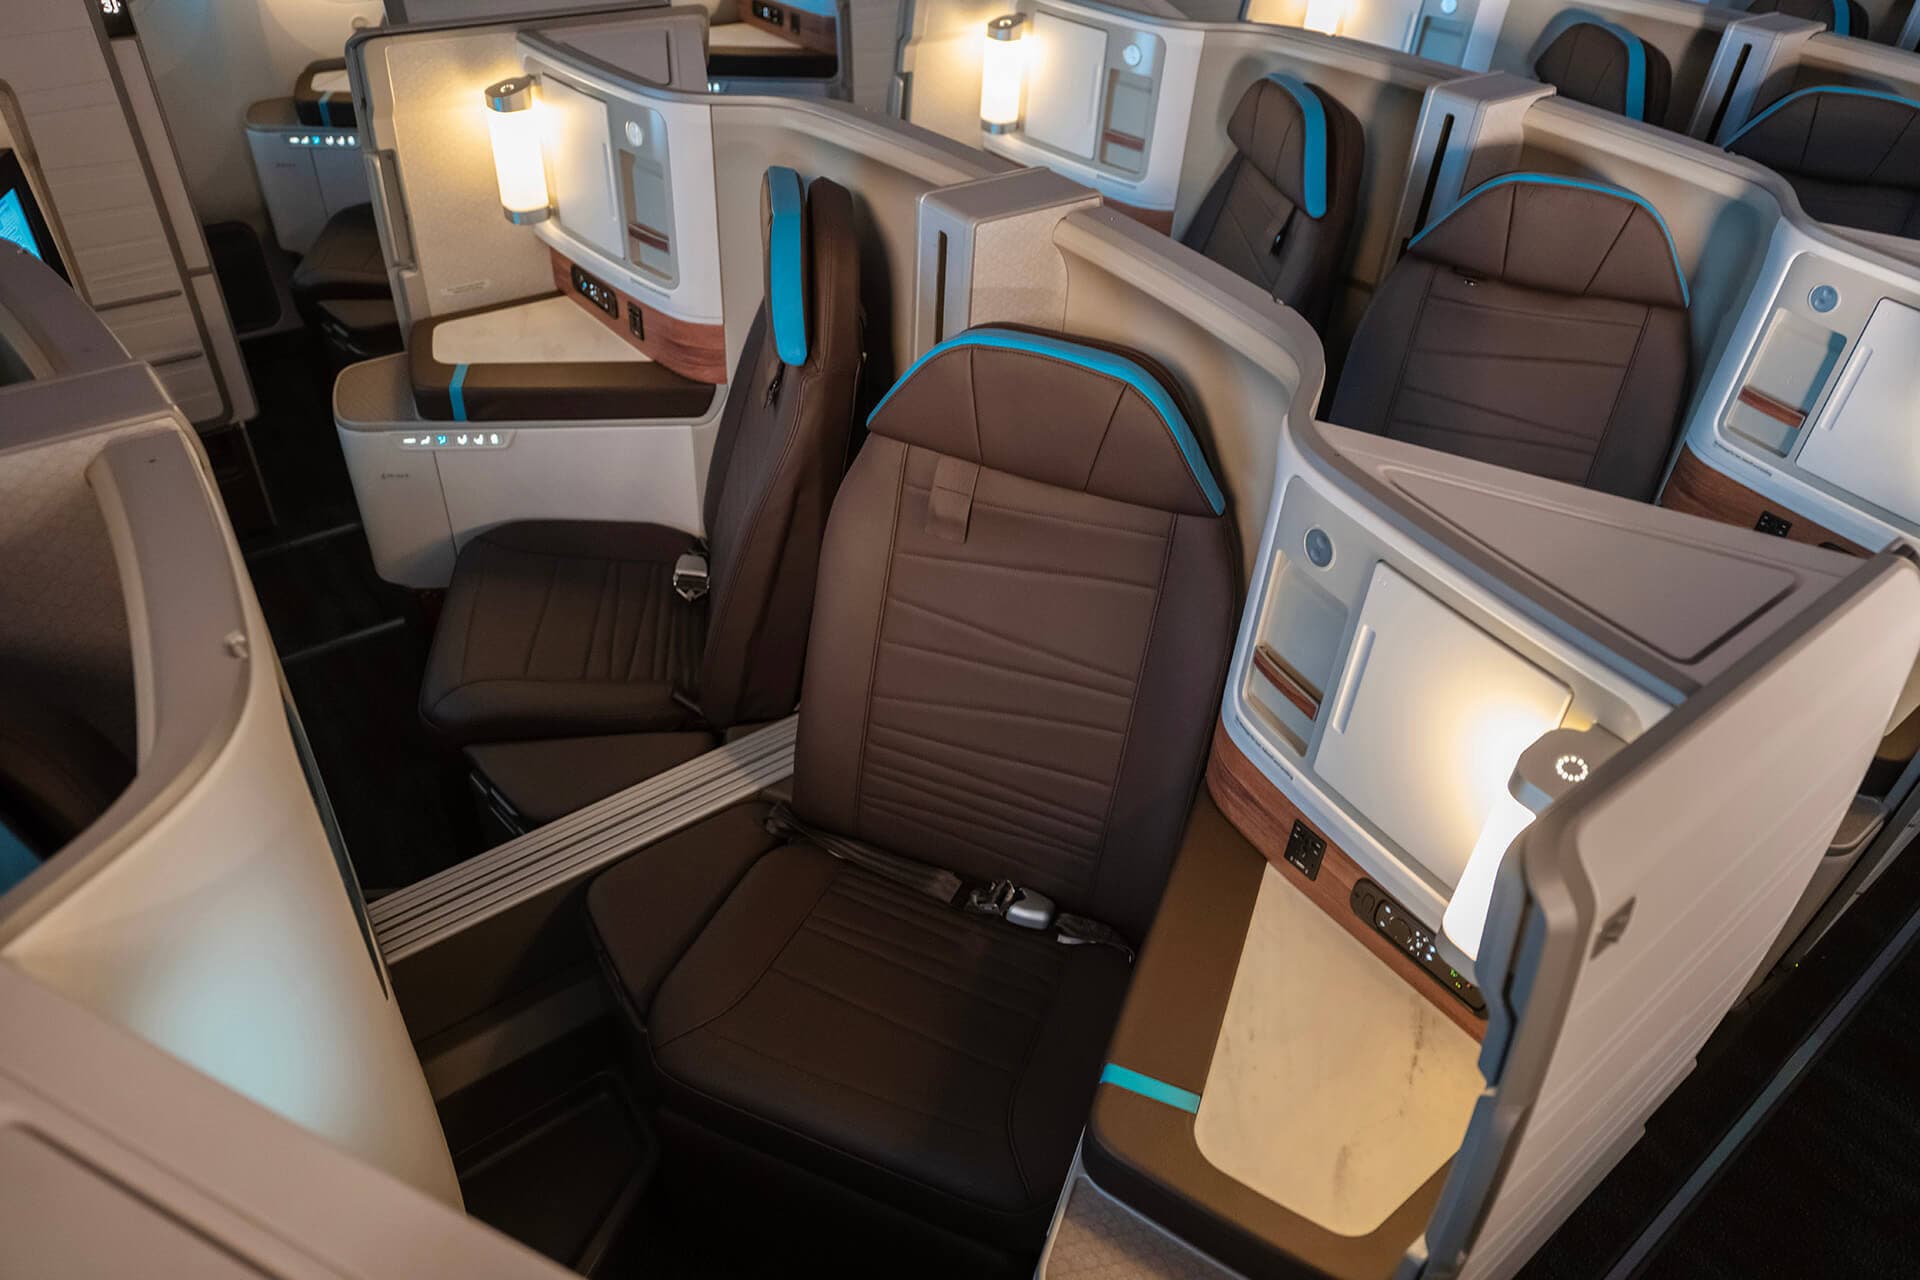 Hawaiian Airlines 787 Premium Cabin with brown leather business class seat